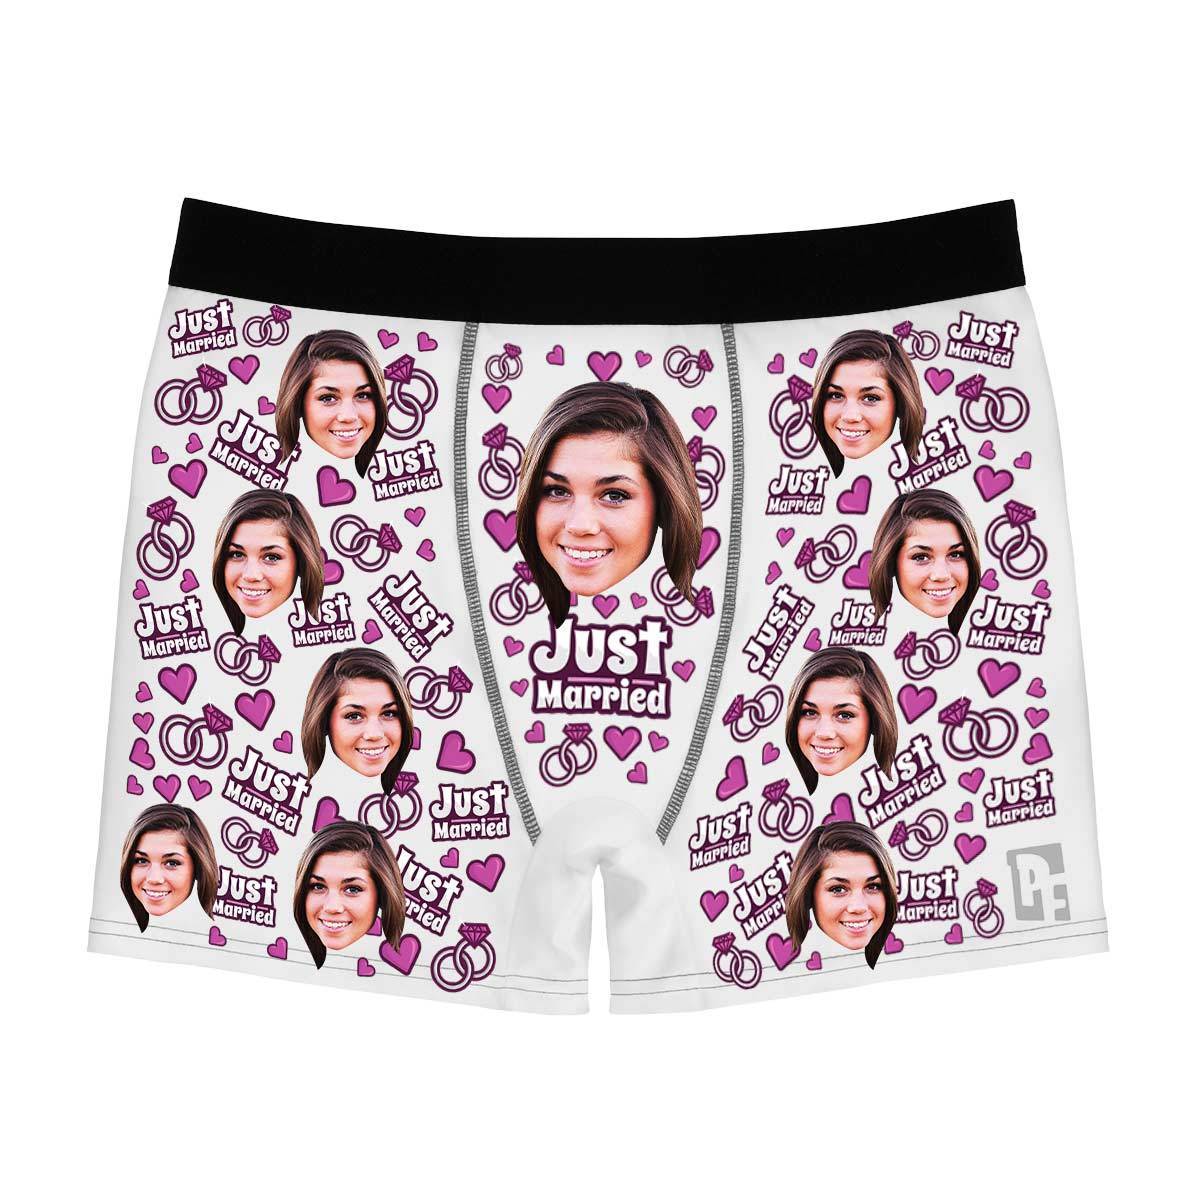 White Just married men's boxer briefs personalized with photo printed on them